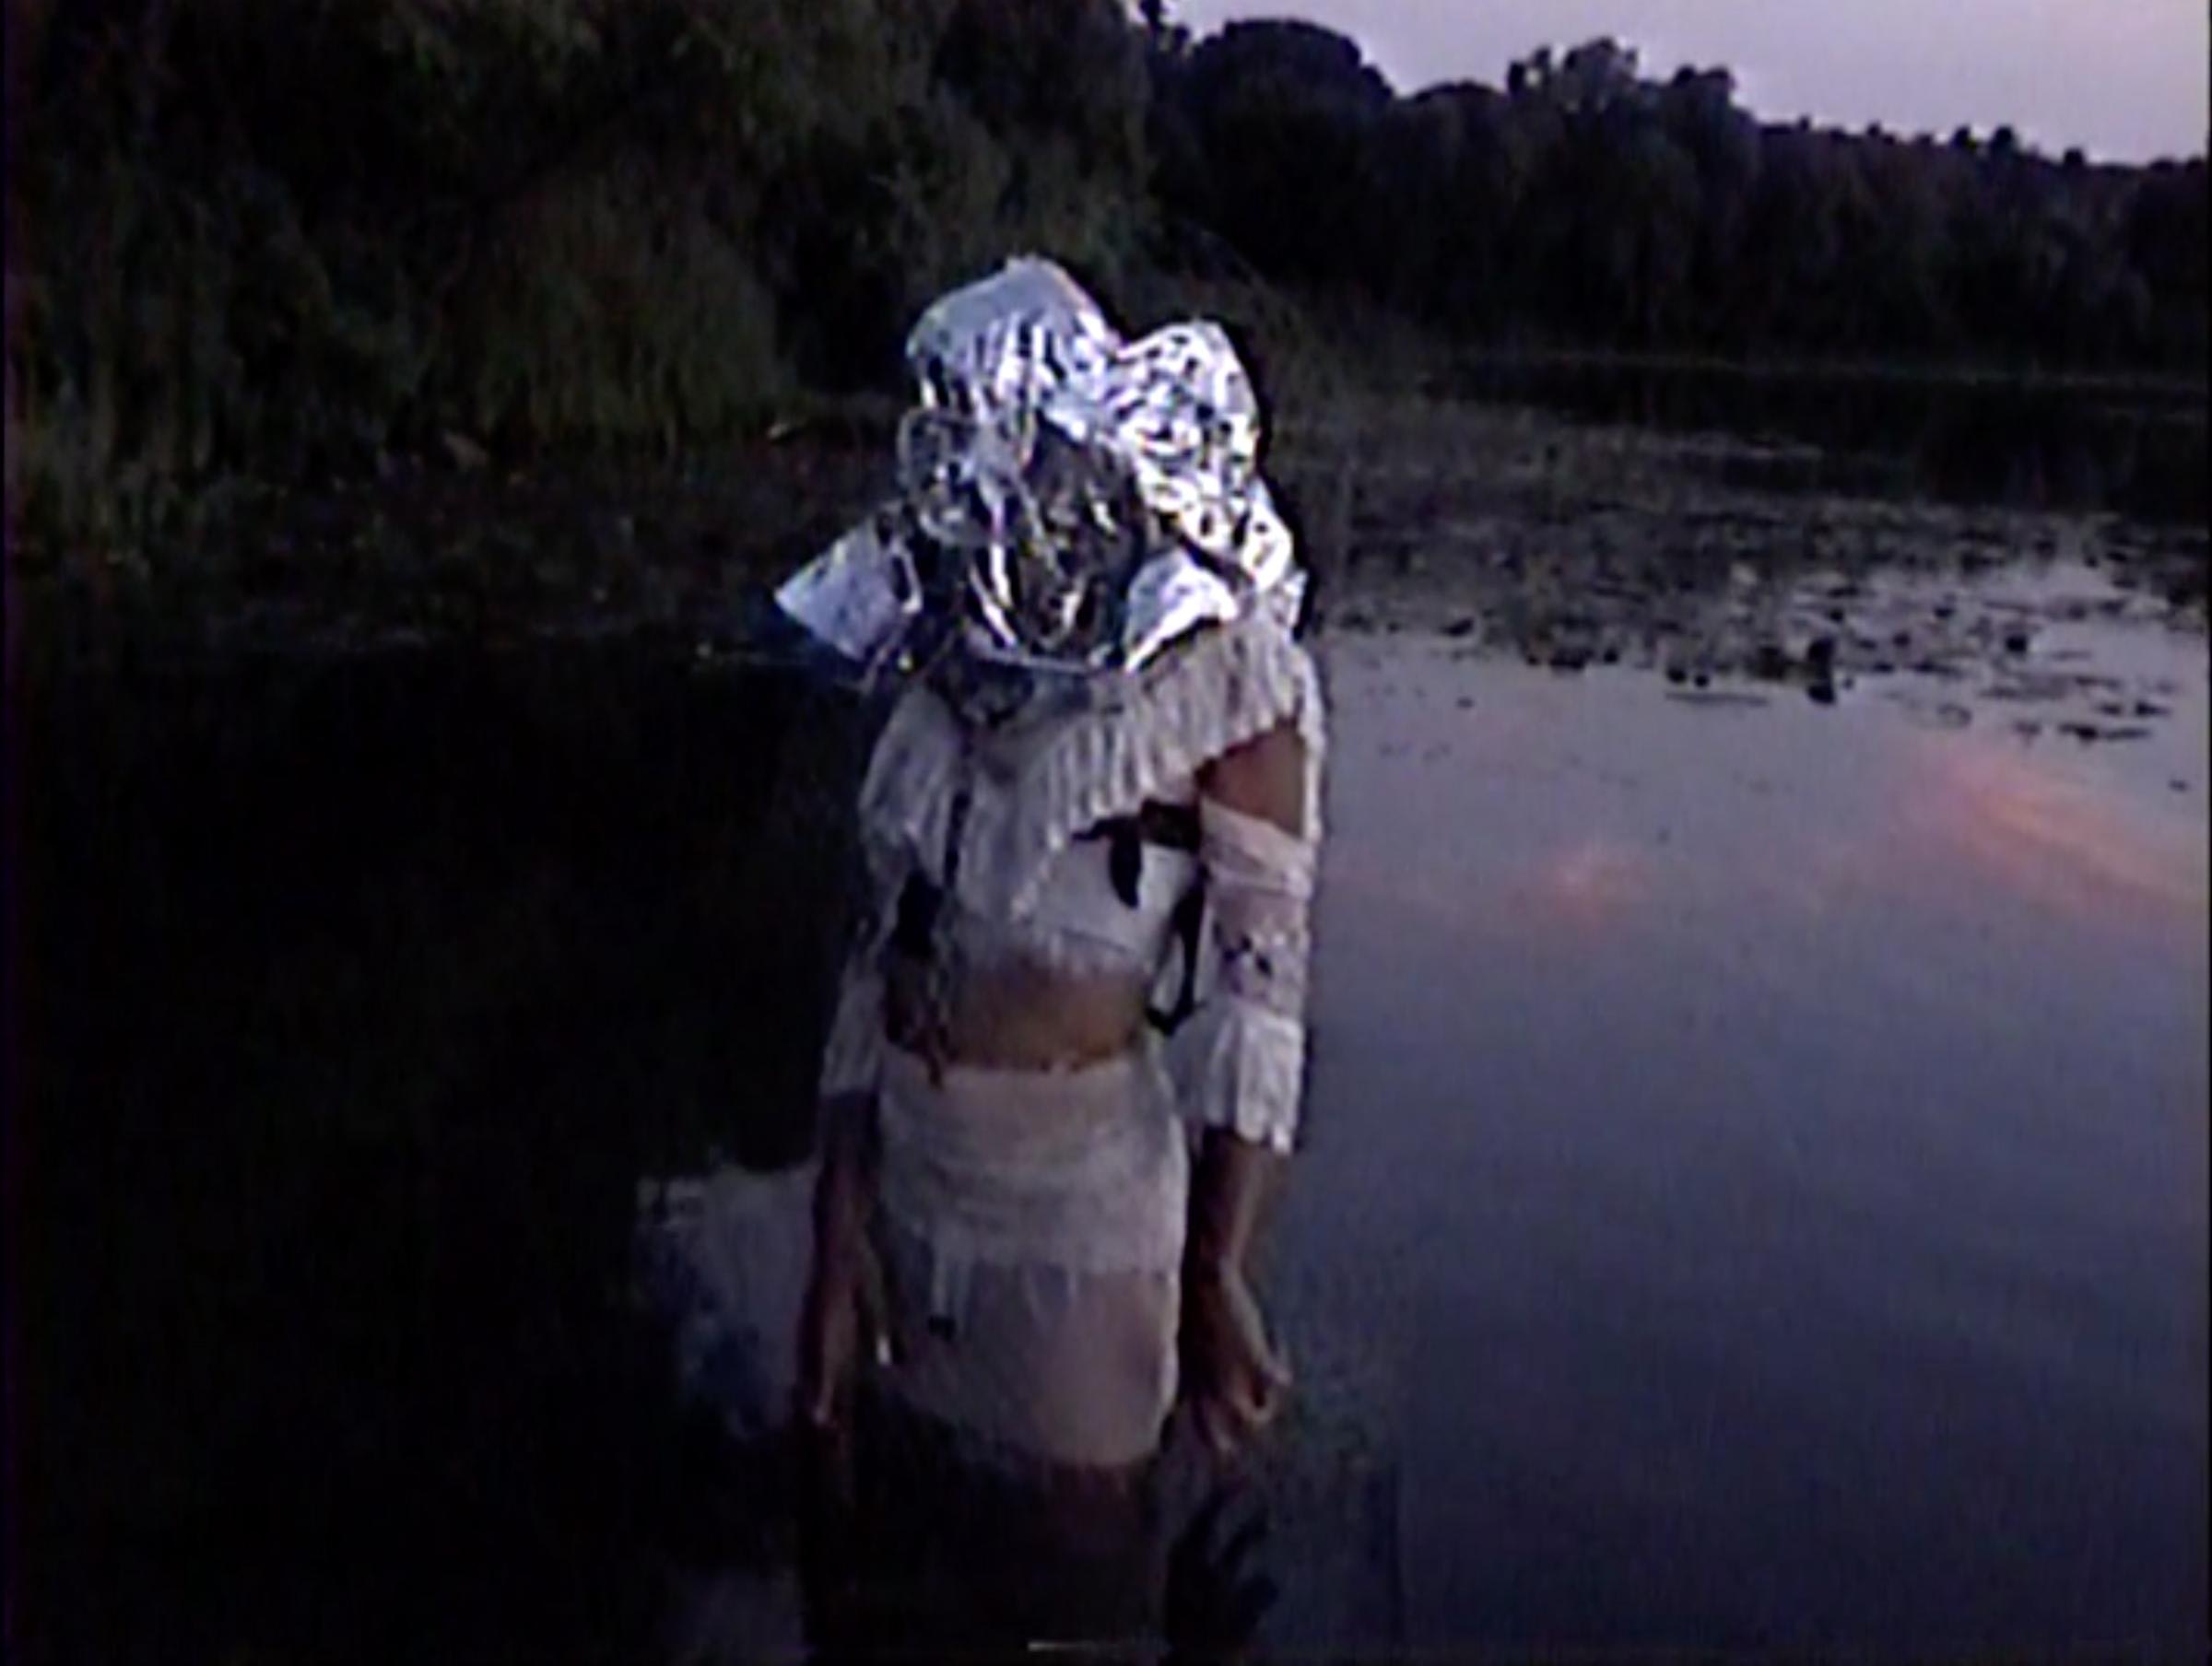 A person with silver metalic covering over their head stands in a lake.